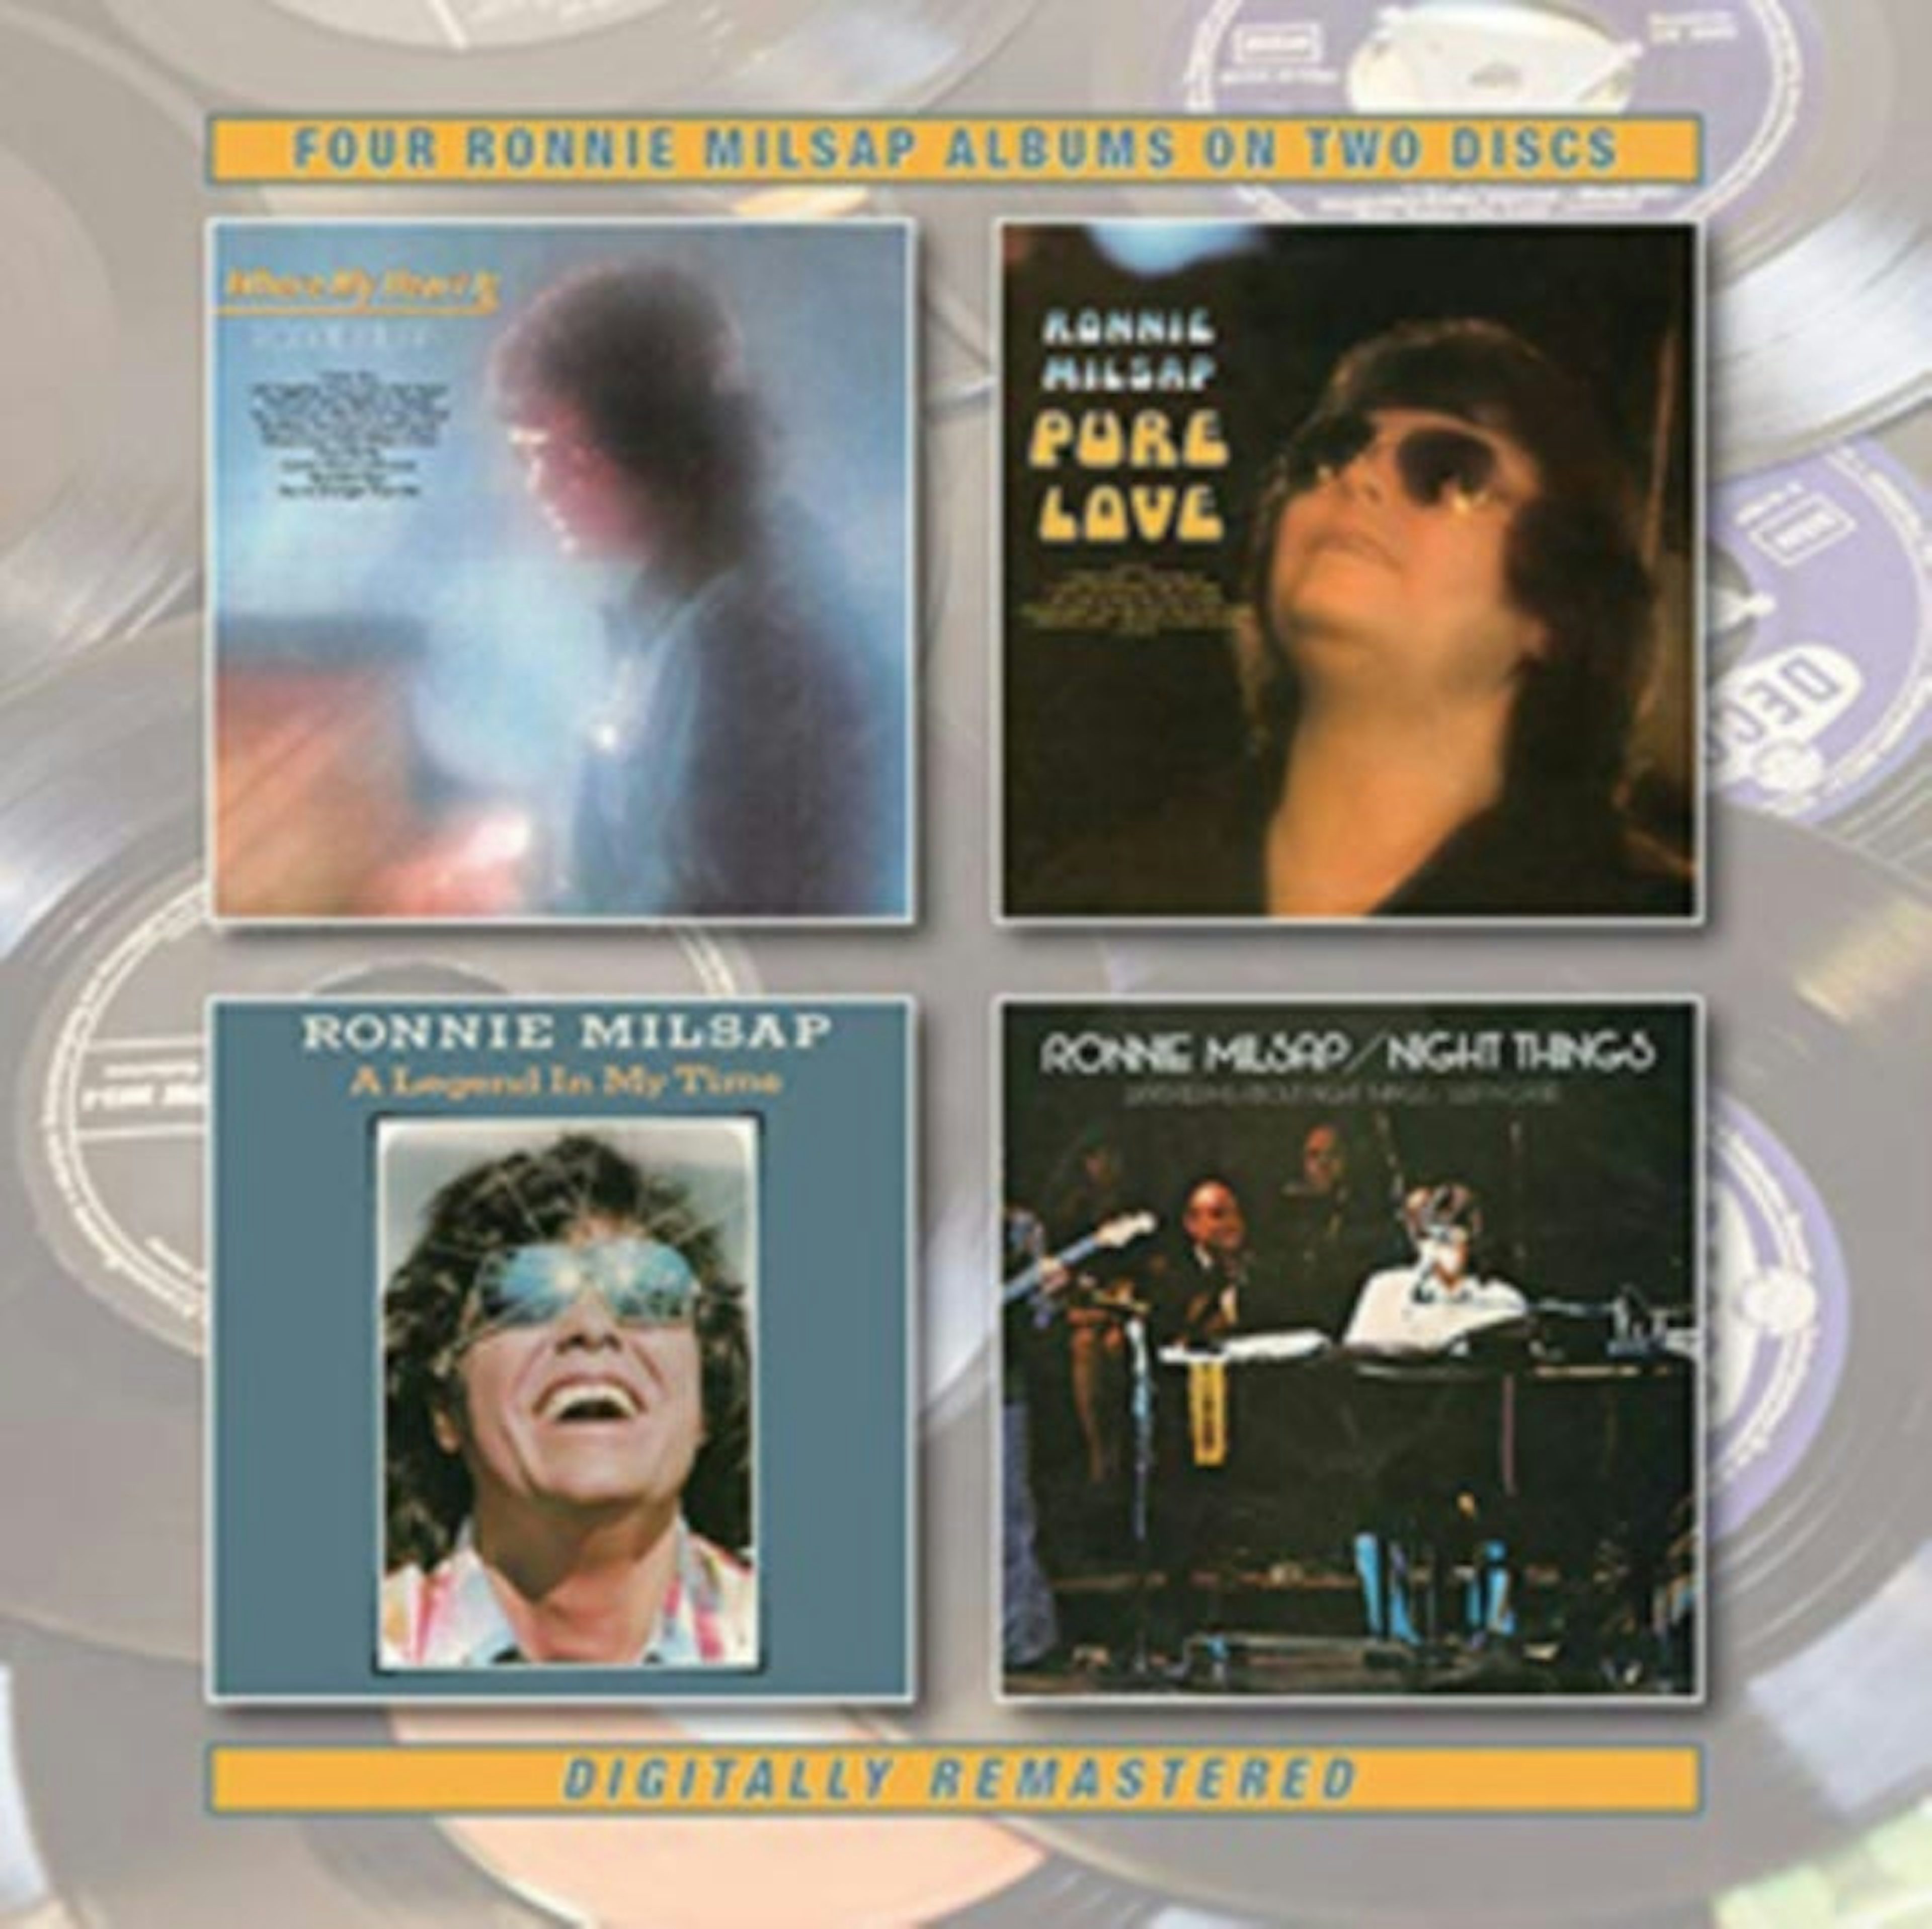 ledig stilling Cafe Mursten Ronnie Milsap CD - Where My Heart Is / Pure Love / A Legend In My Time /  Night Things